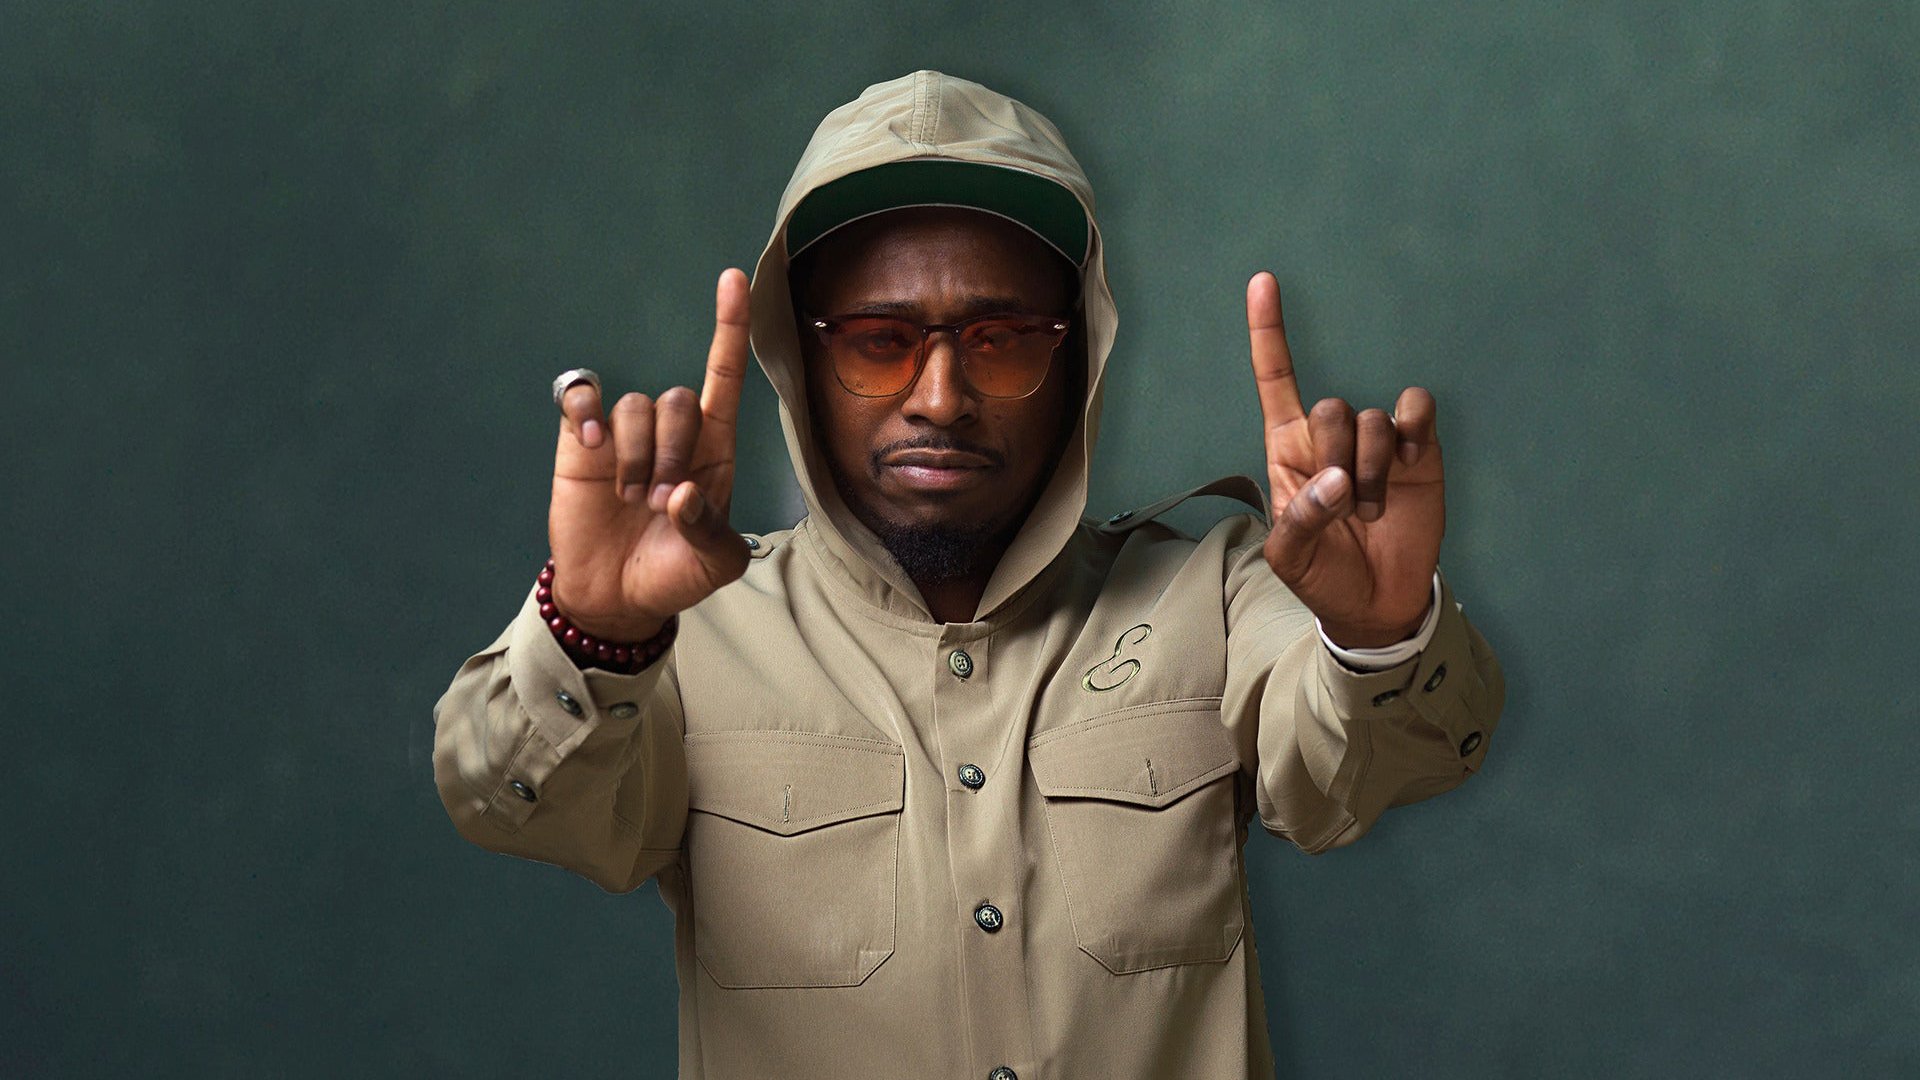 Eddie Griffin Brings His Talents To Radiant Streaming Platform. The Channel NTV Is Where The Legendary Comedian/Actor Will Entertain Audiences With Sports, Interviews, Talk Shows And Live Comedy